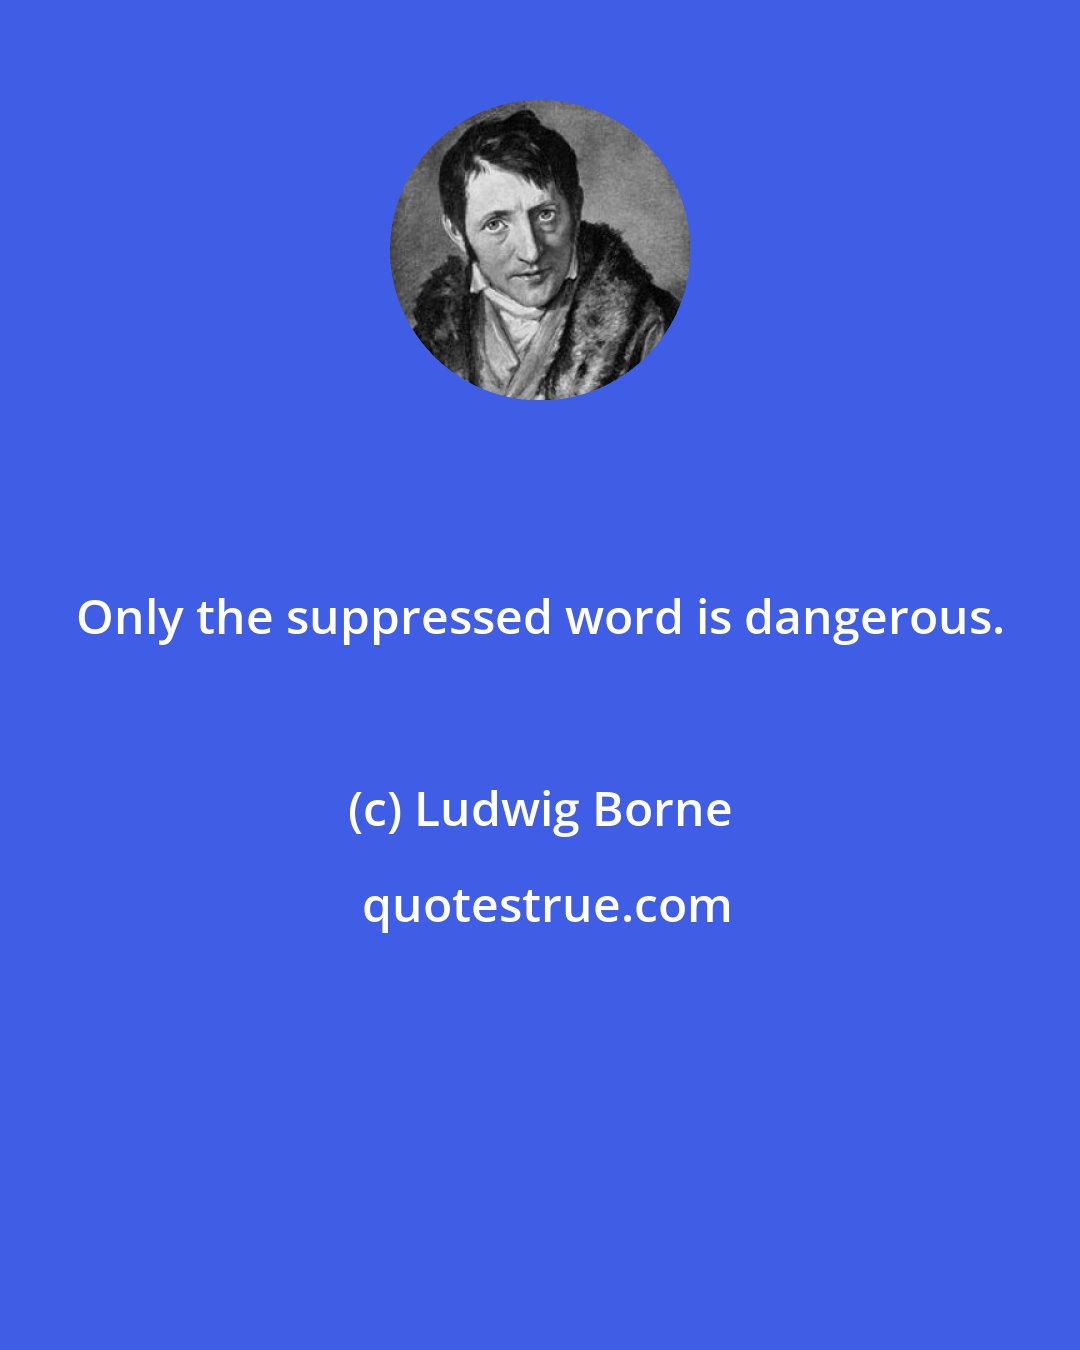 Ludwig Borne: Only the suppressed word is dangerous.